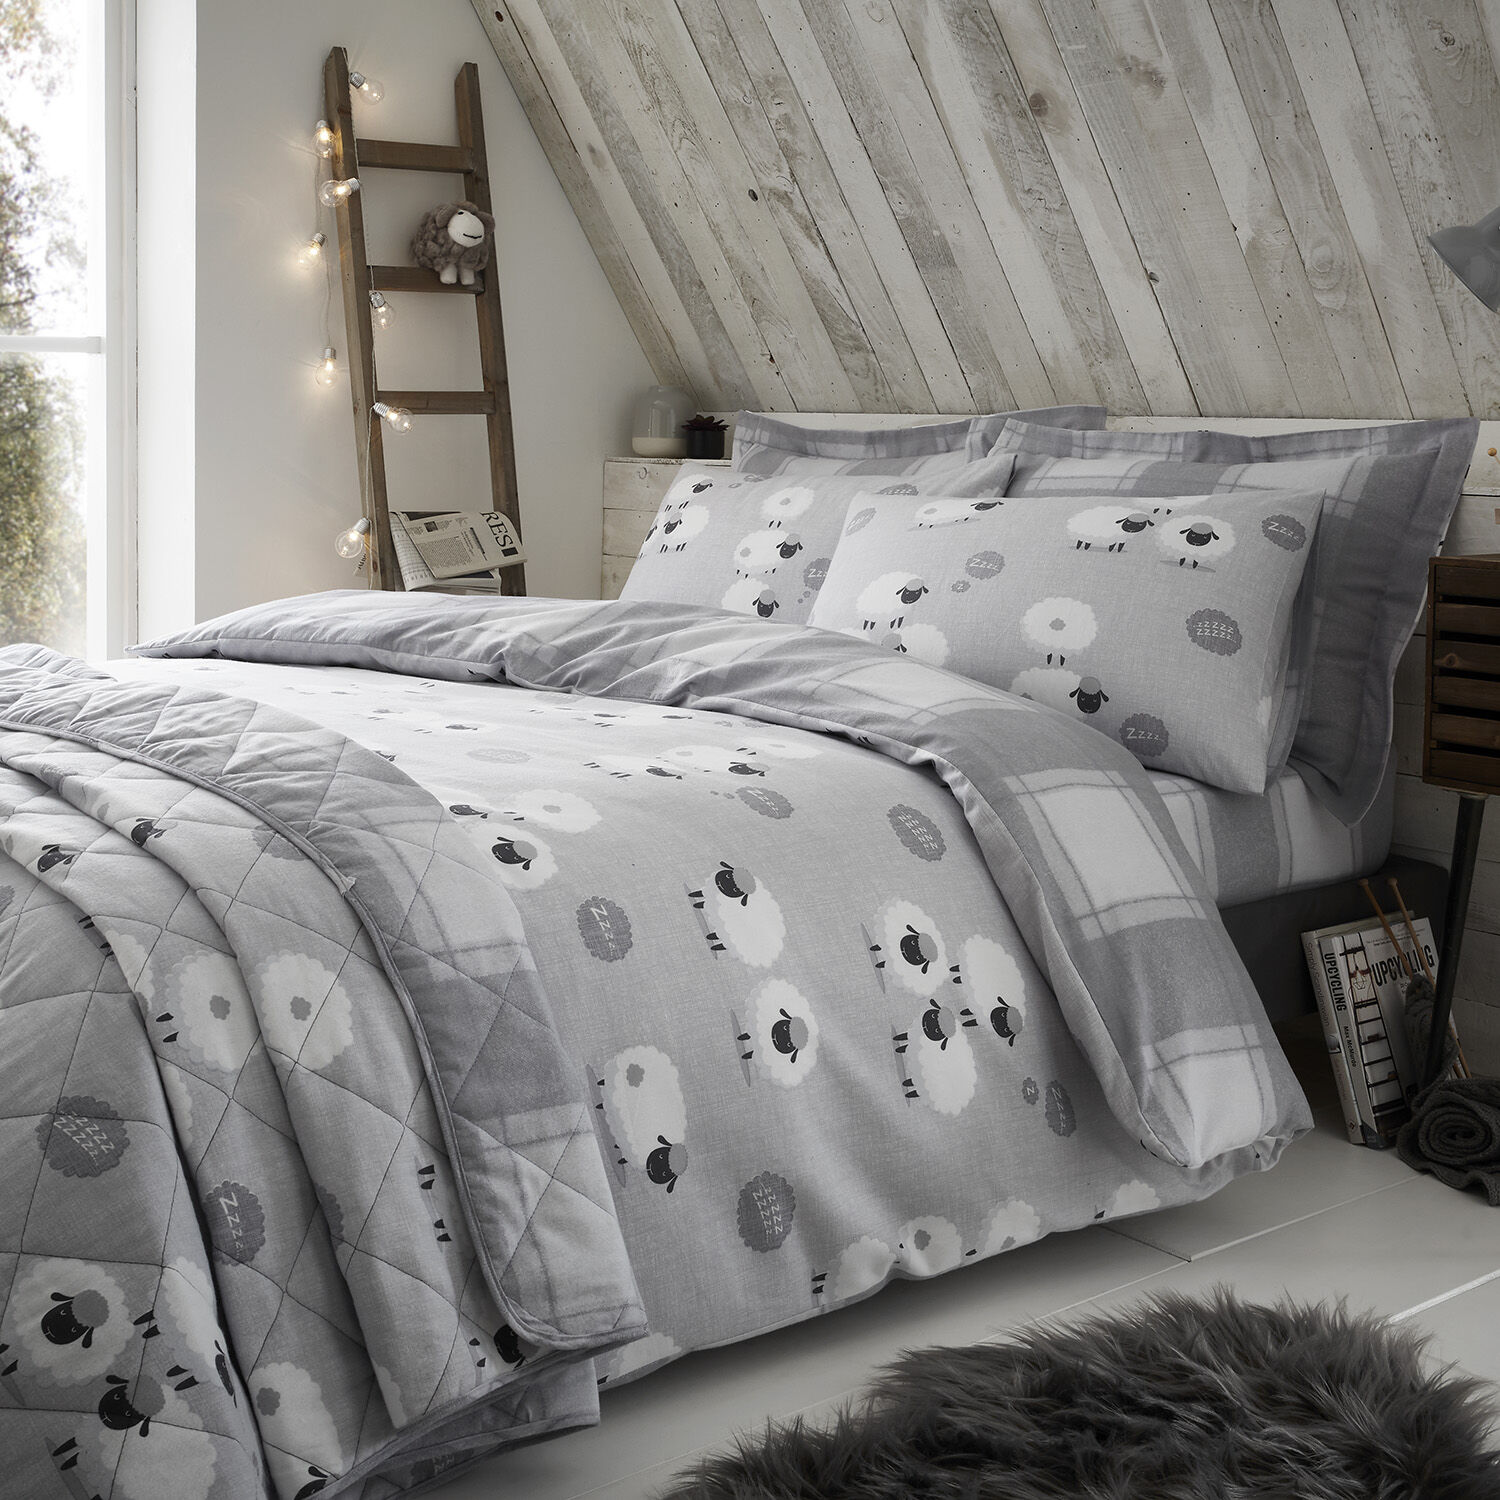 Brushed Cotton Snoozy Sheep Bed Linen, Grey Super King Bed Covers